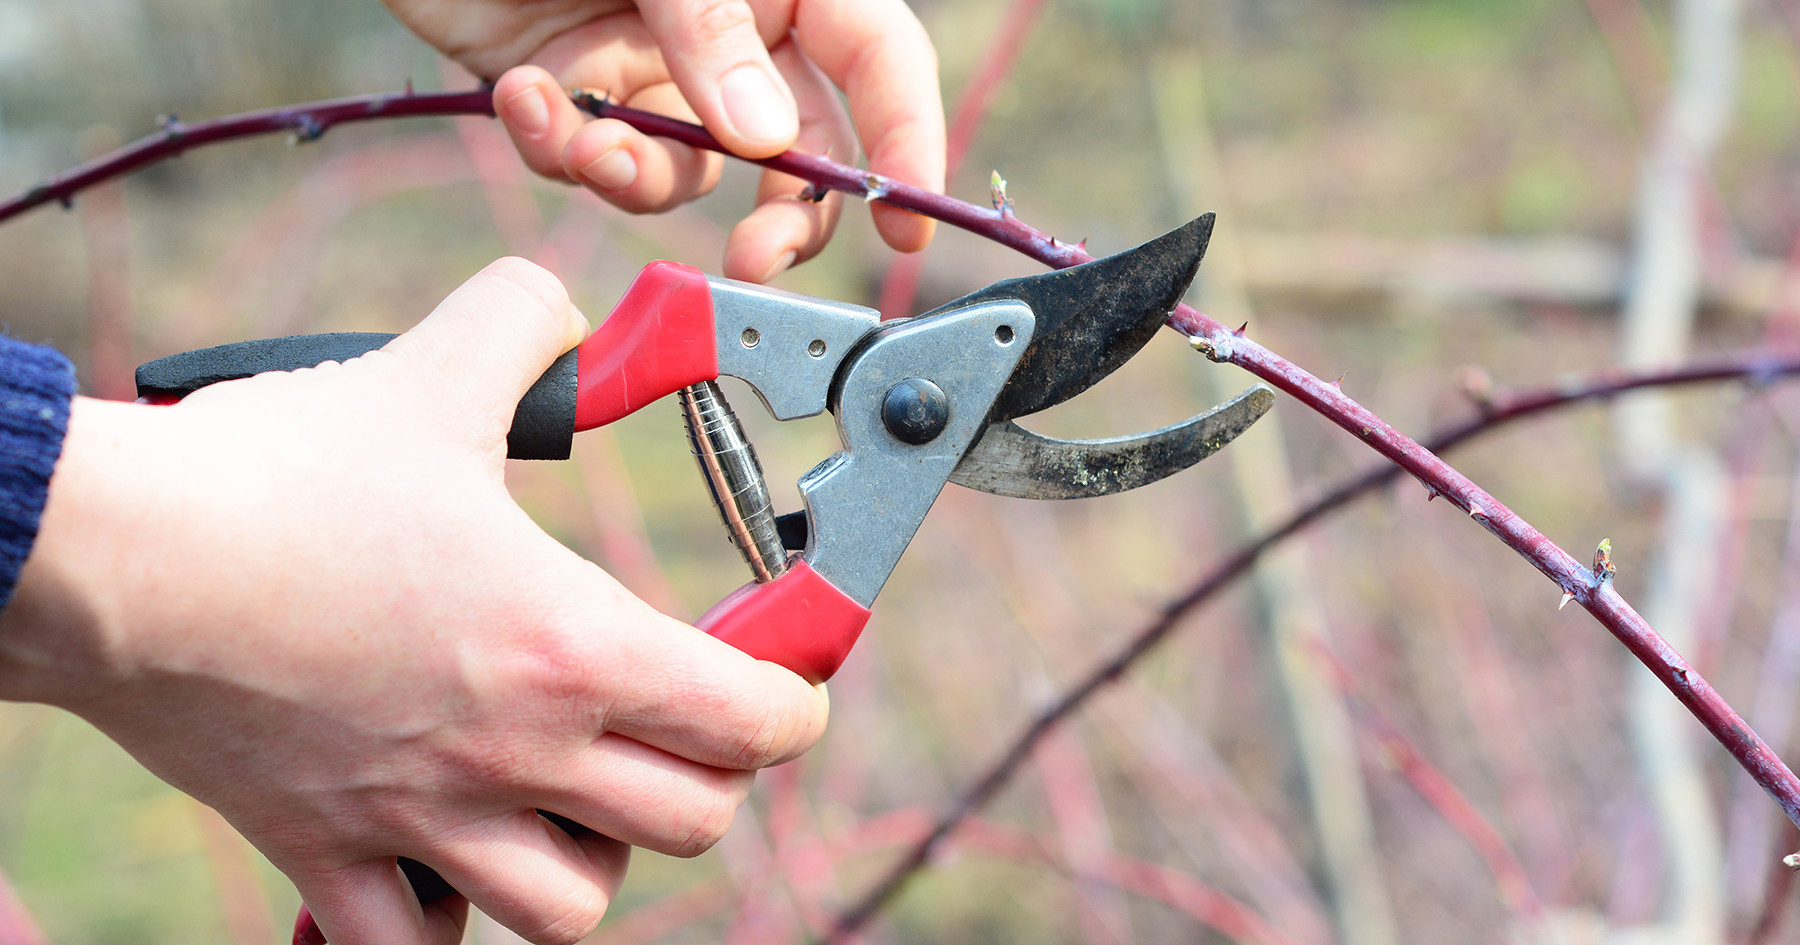 A person cutting a branch with a pair of pruning shears